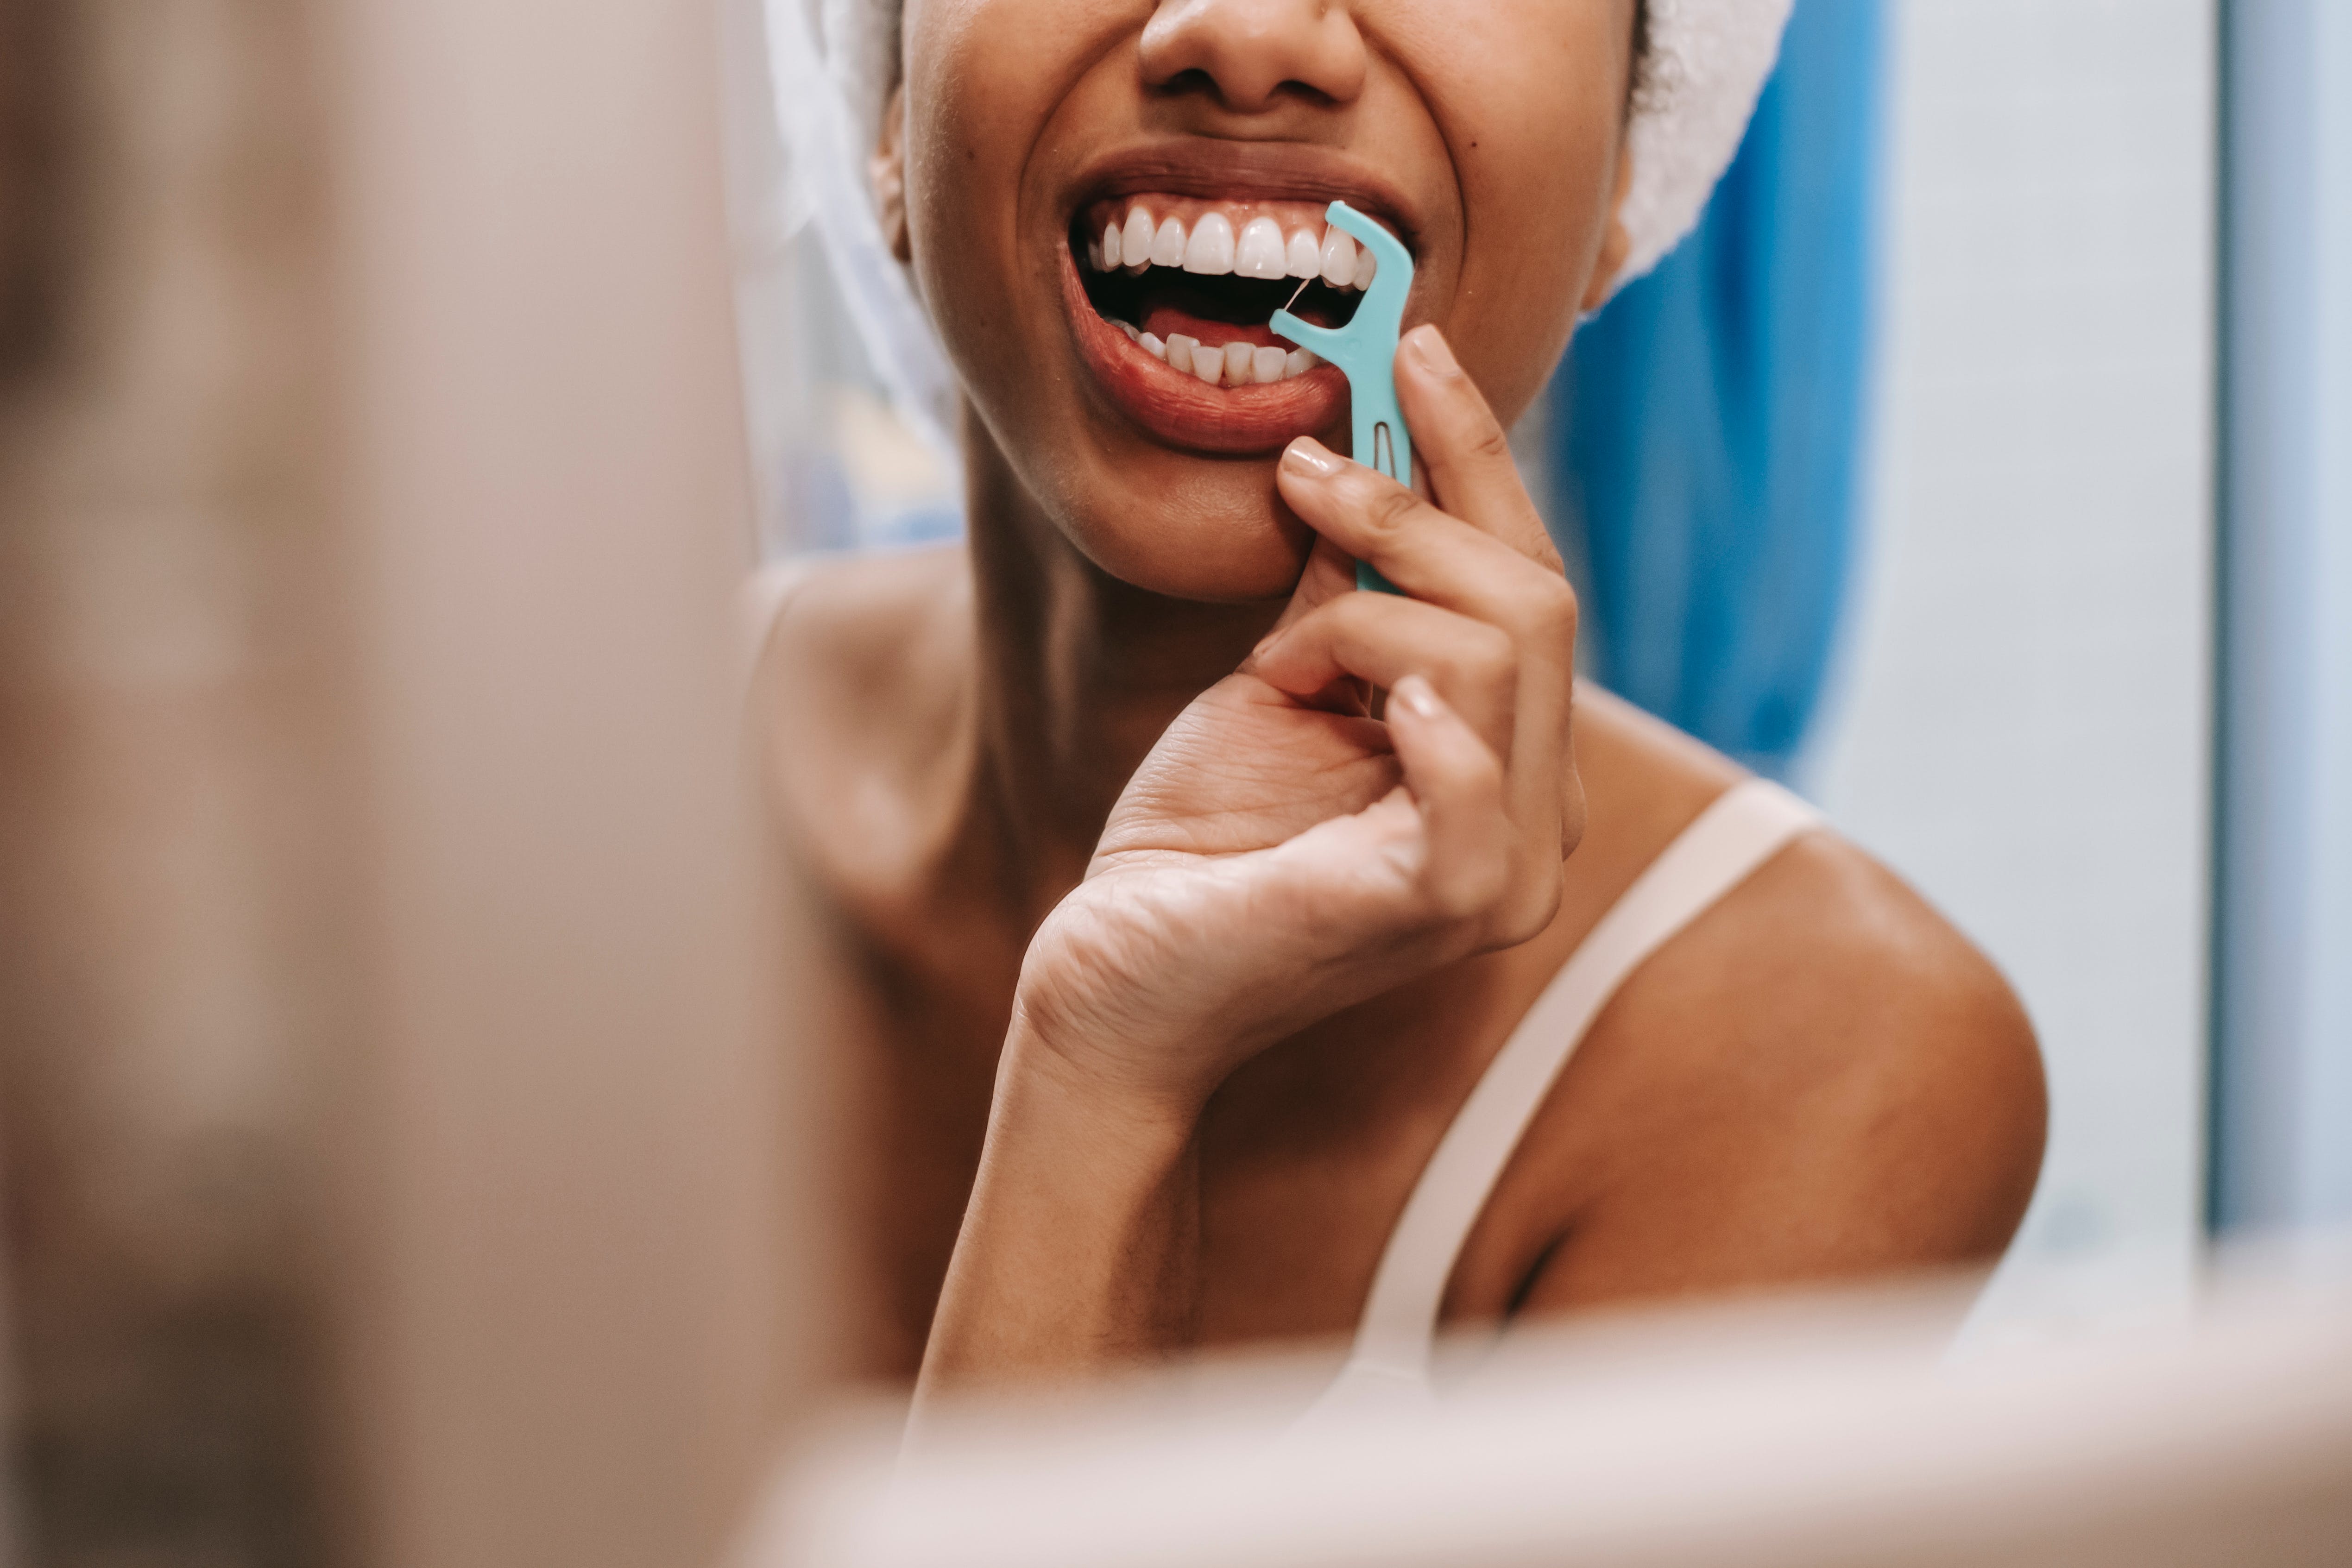 The woman in the image takes care of her dental health by using dental floss